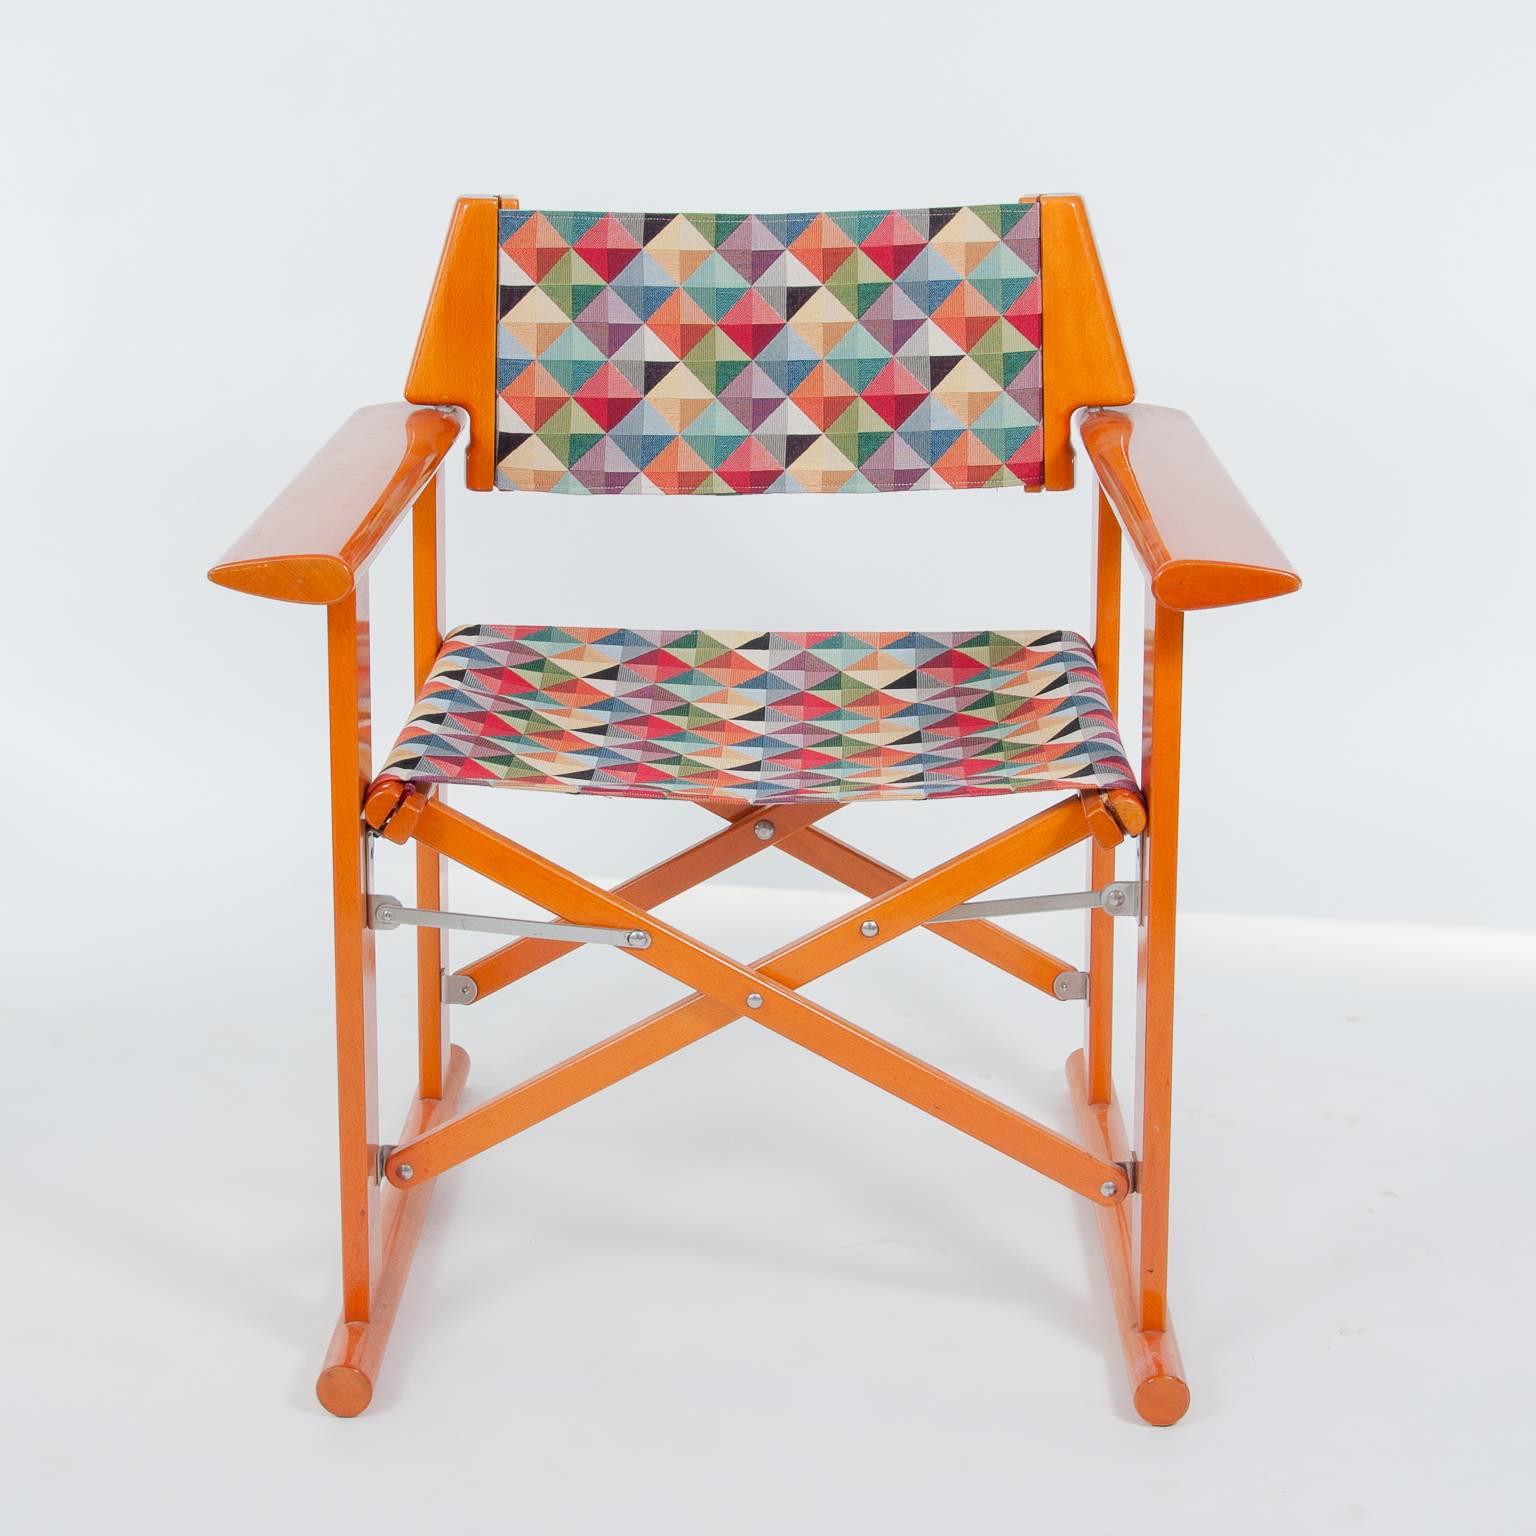 Manufactured by Fratelli Reguitti, Italy, 1970s-1980s.
A folding construction with lacquered wood, the seating and backrest covered with high quality fabric in colorful geometric pattern.